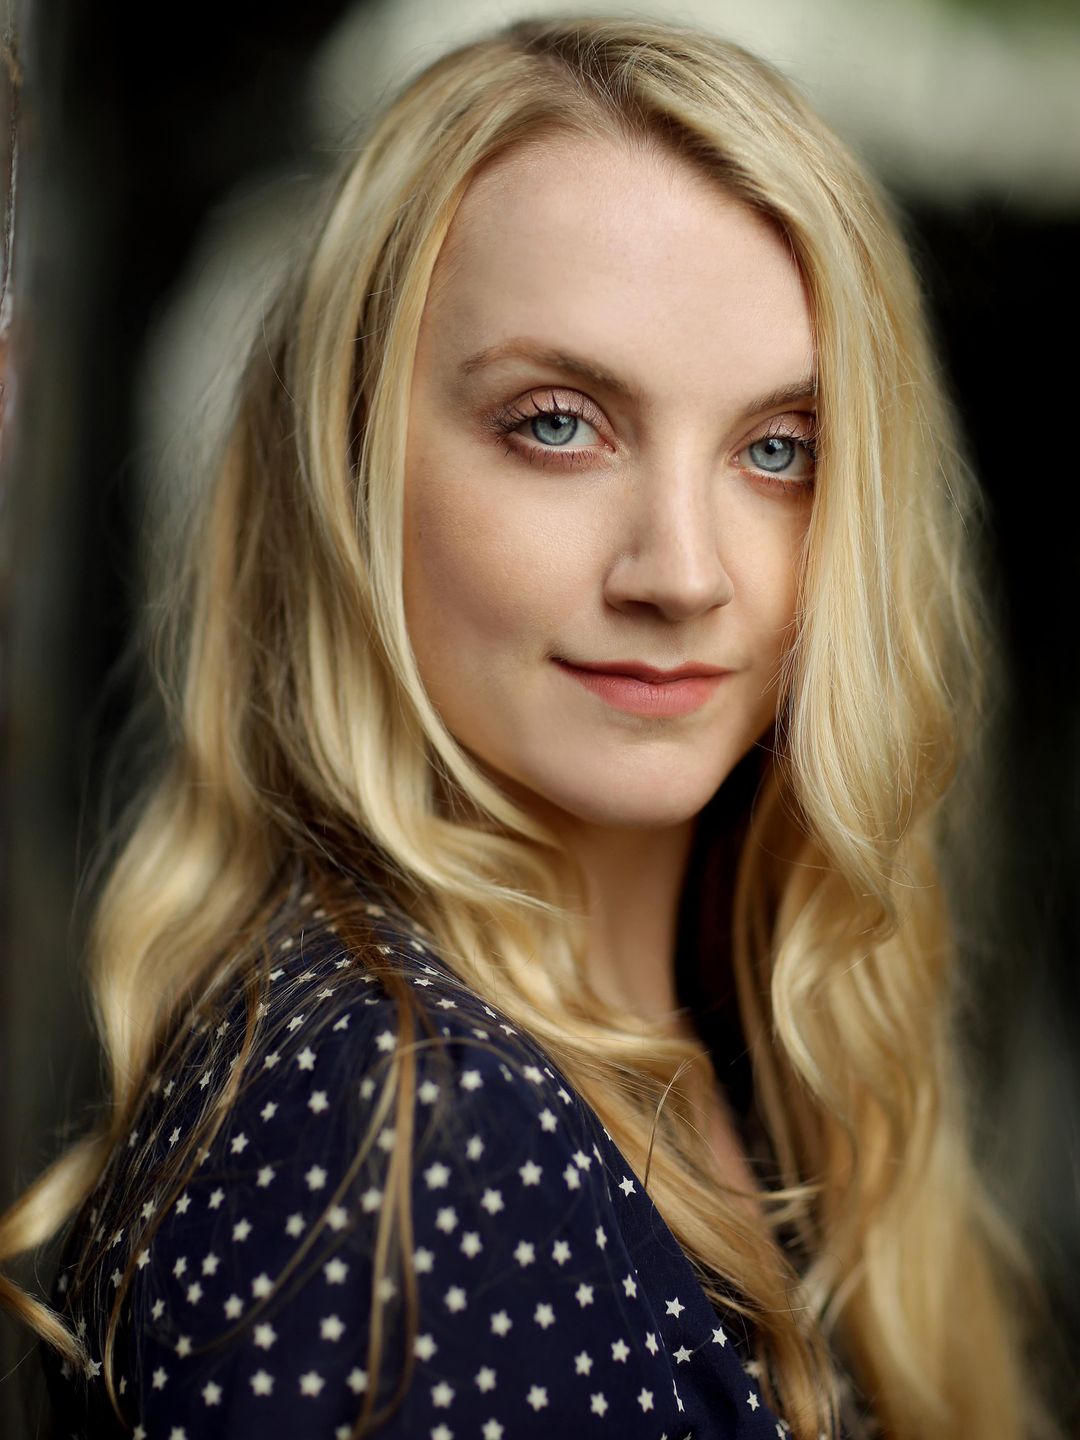 Evanna Lynch who is her father